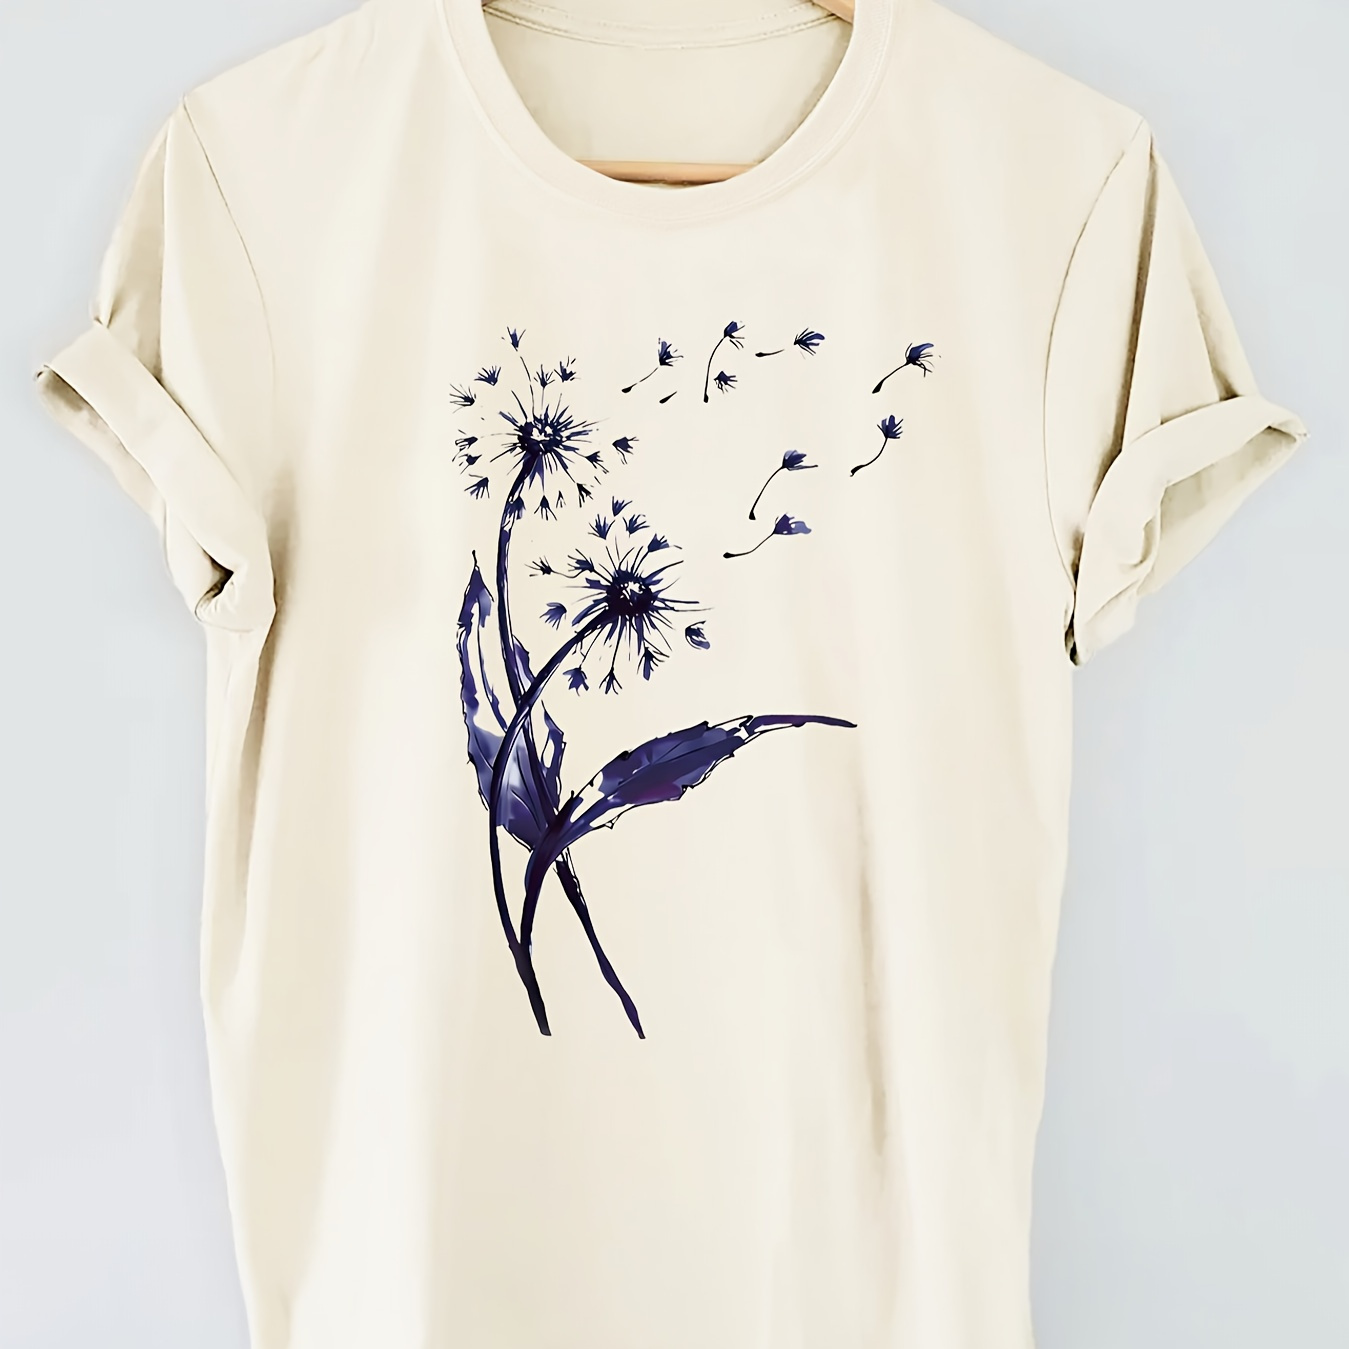 

Dandelion Print T-shirt, Short Sleeve Crew Neck Casual Top For Summer & Spring, Women's Clothing